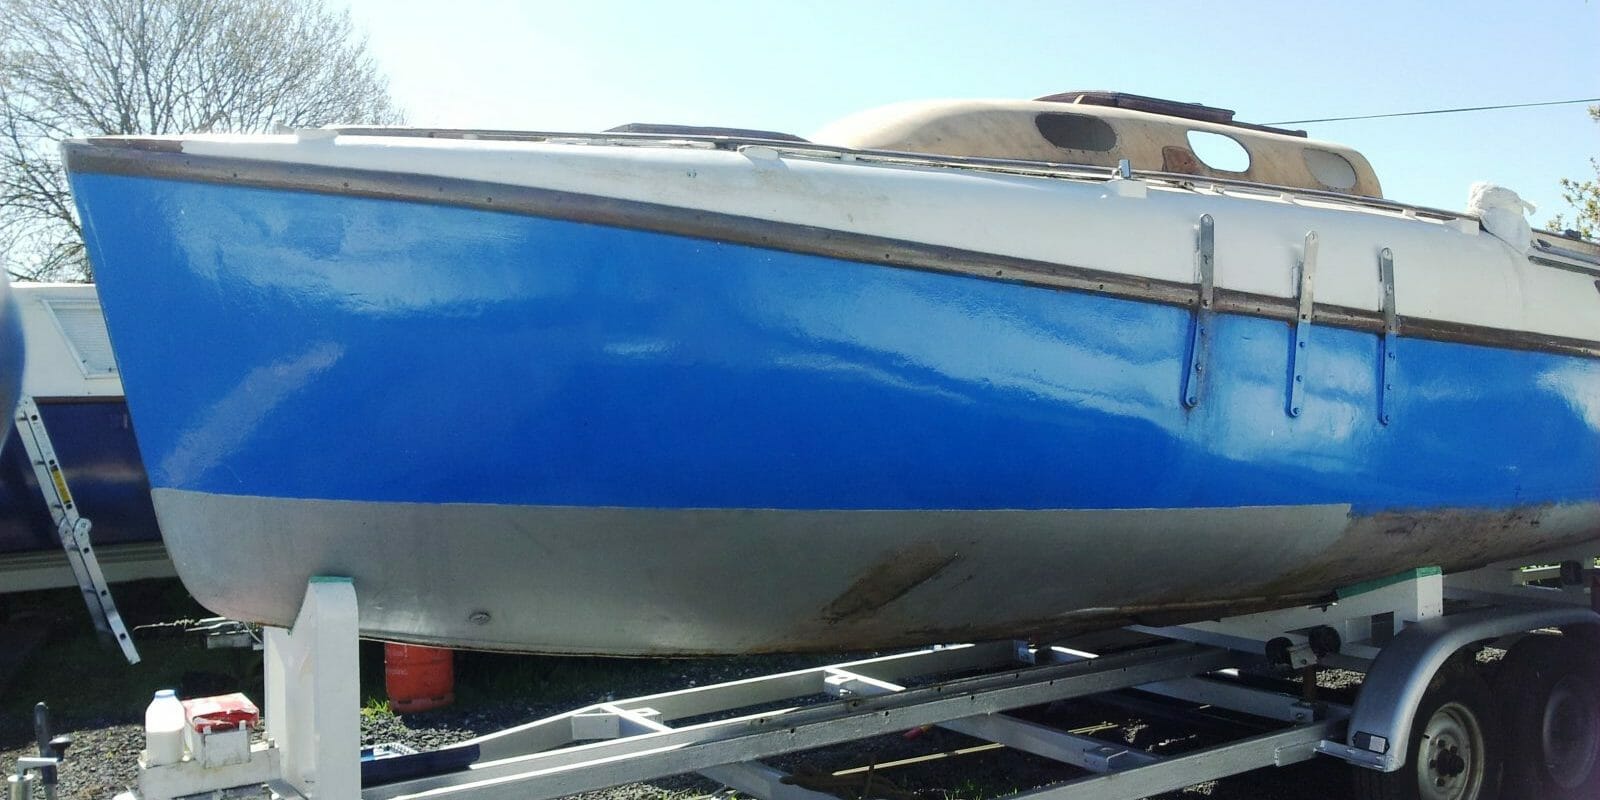 A115 Hull is in very good condition